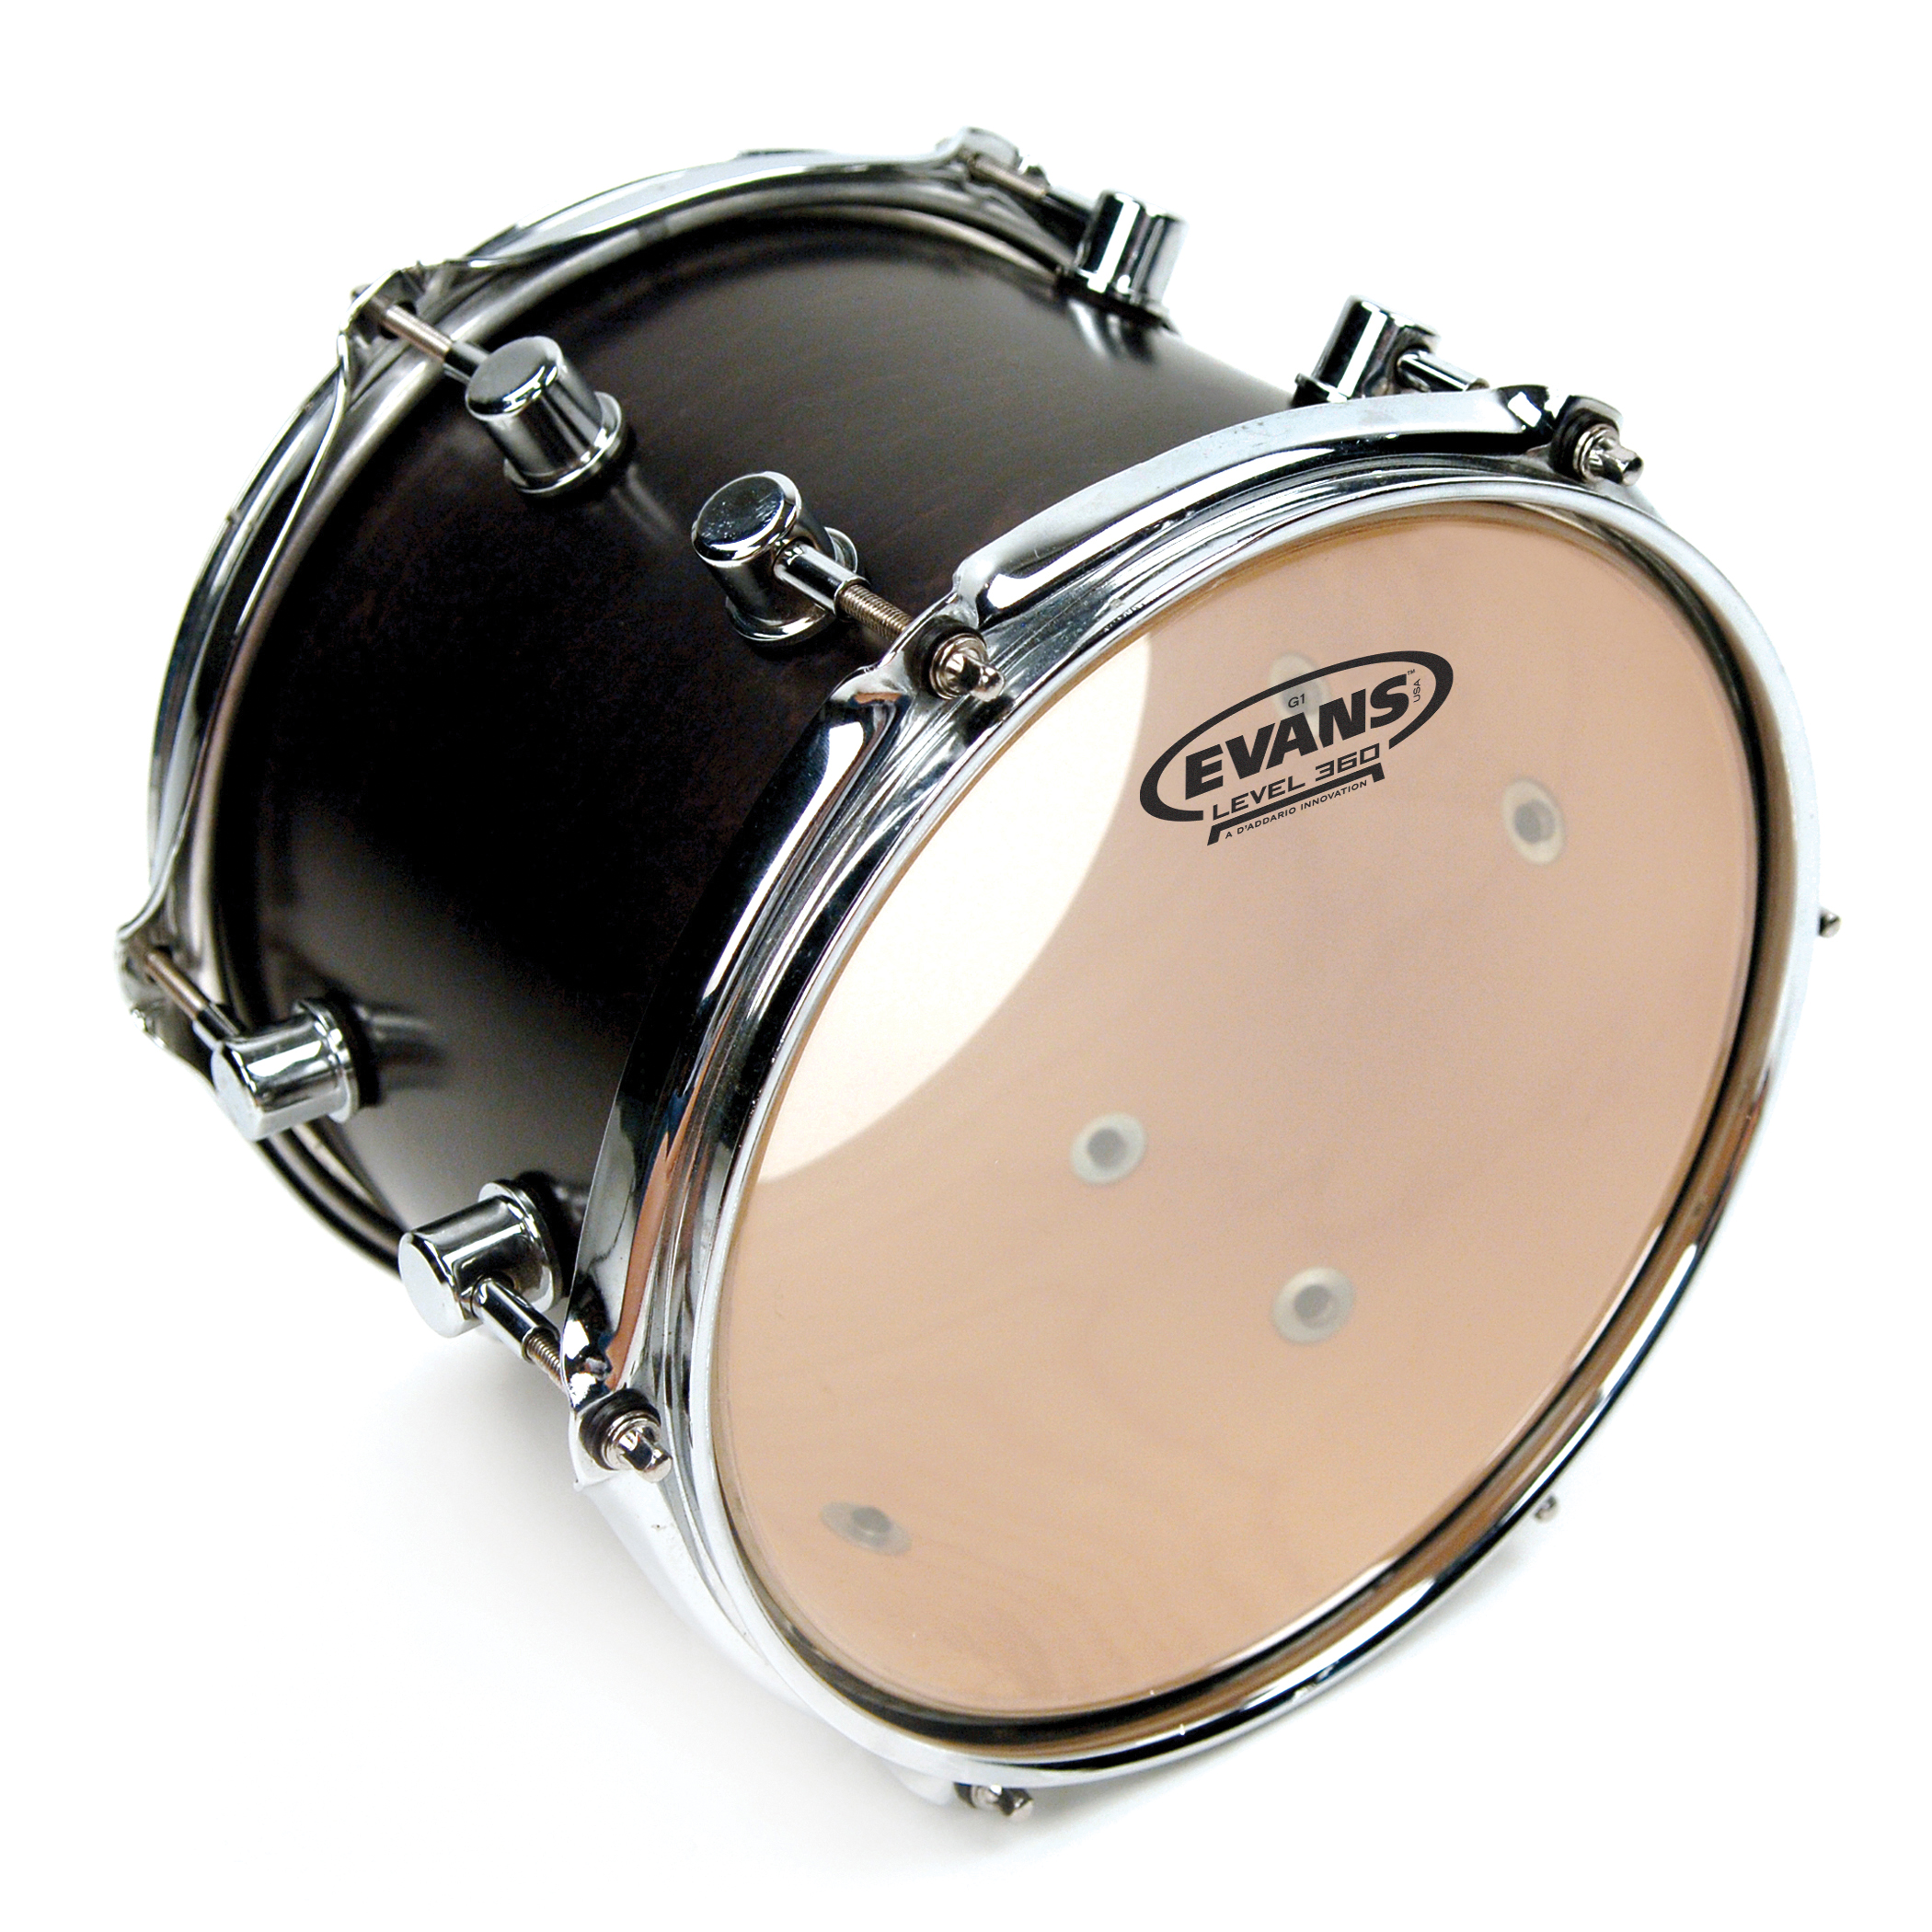 Pacific Drums SX Series Hammered Brass Snare (5.5x14 in.)